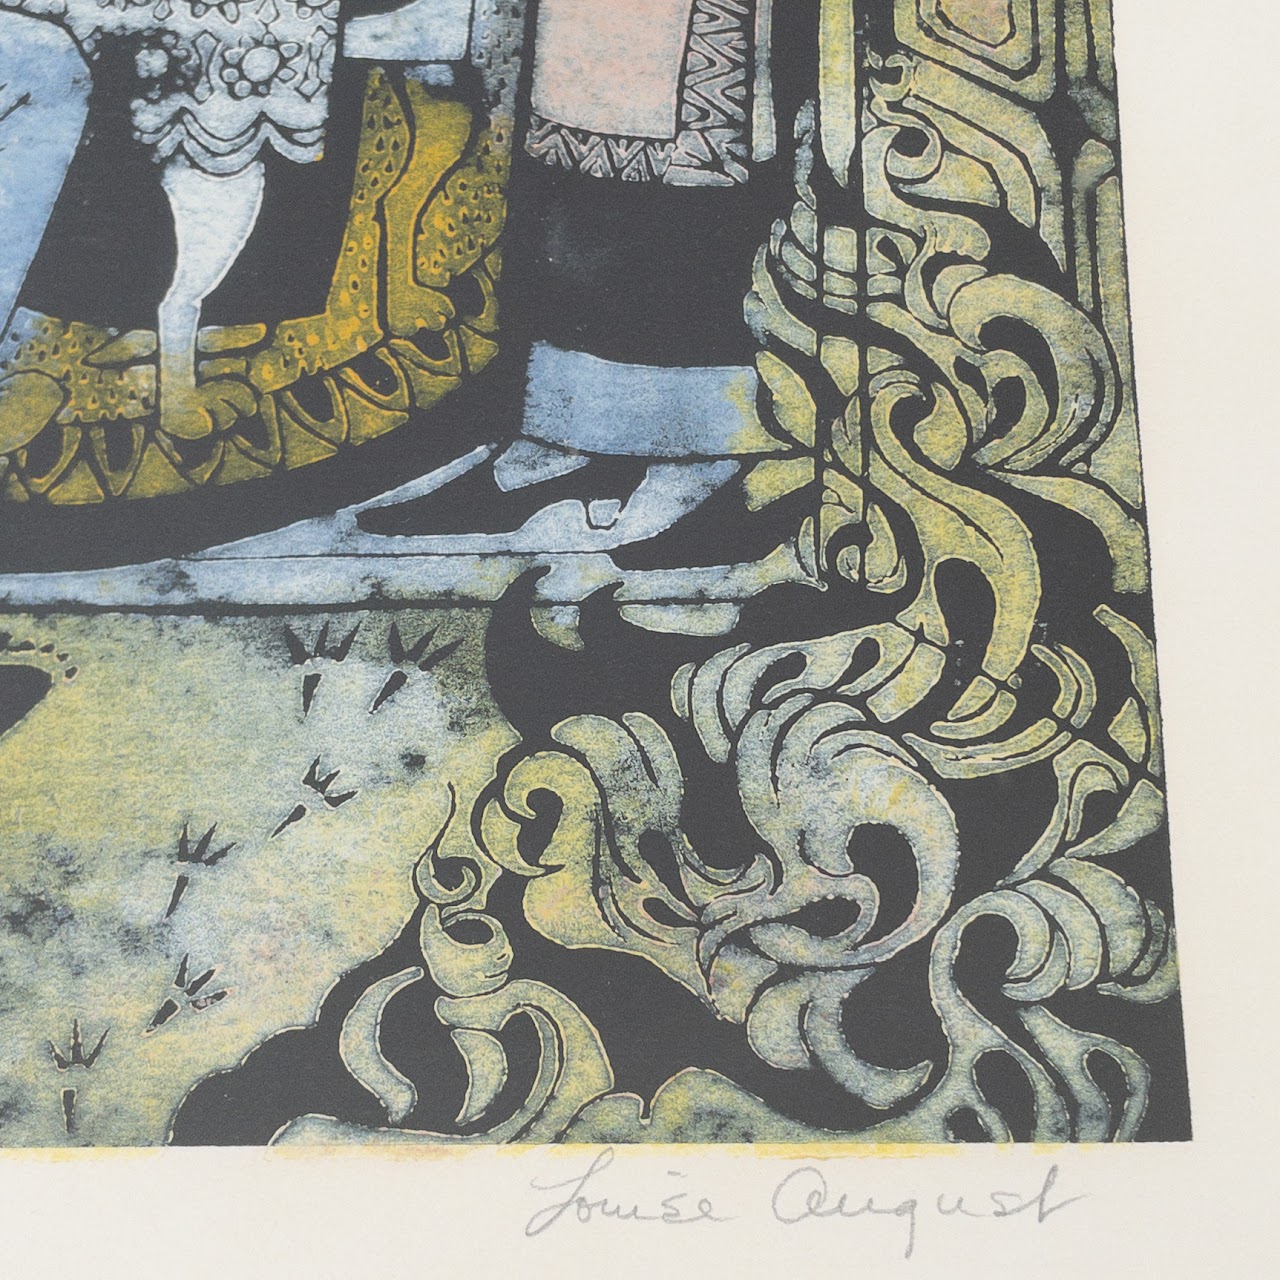 Louise August 'The Arrival of Elijah' Signed Woodblock Print